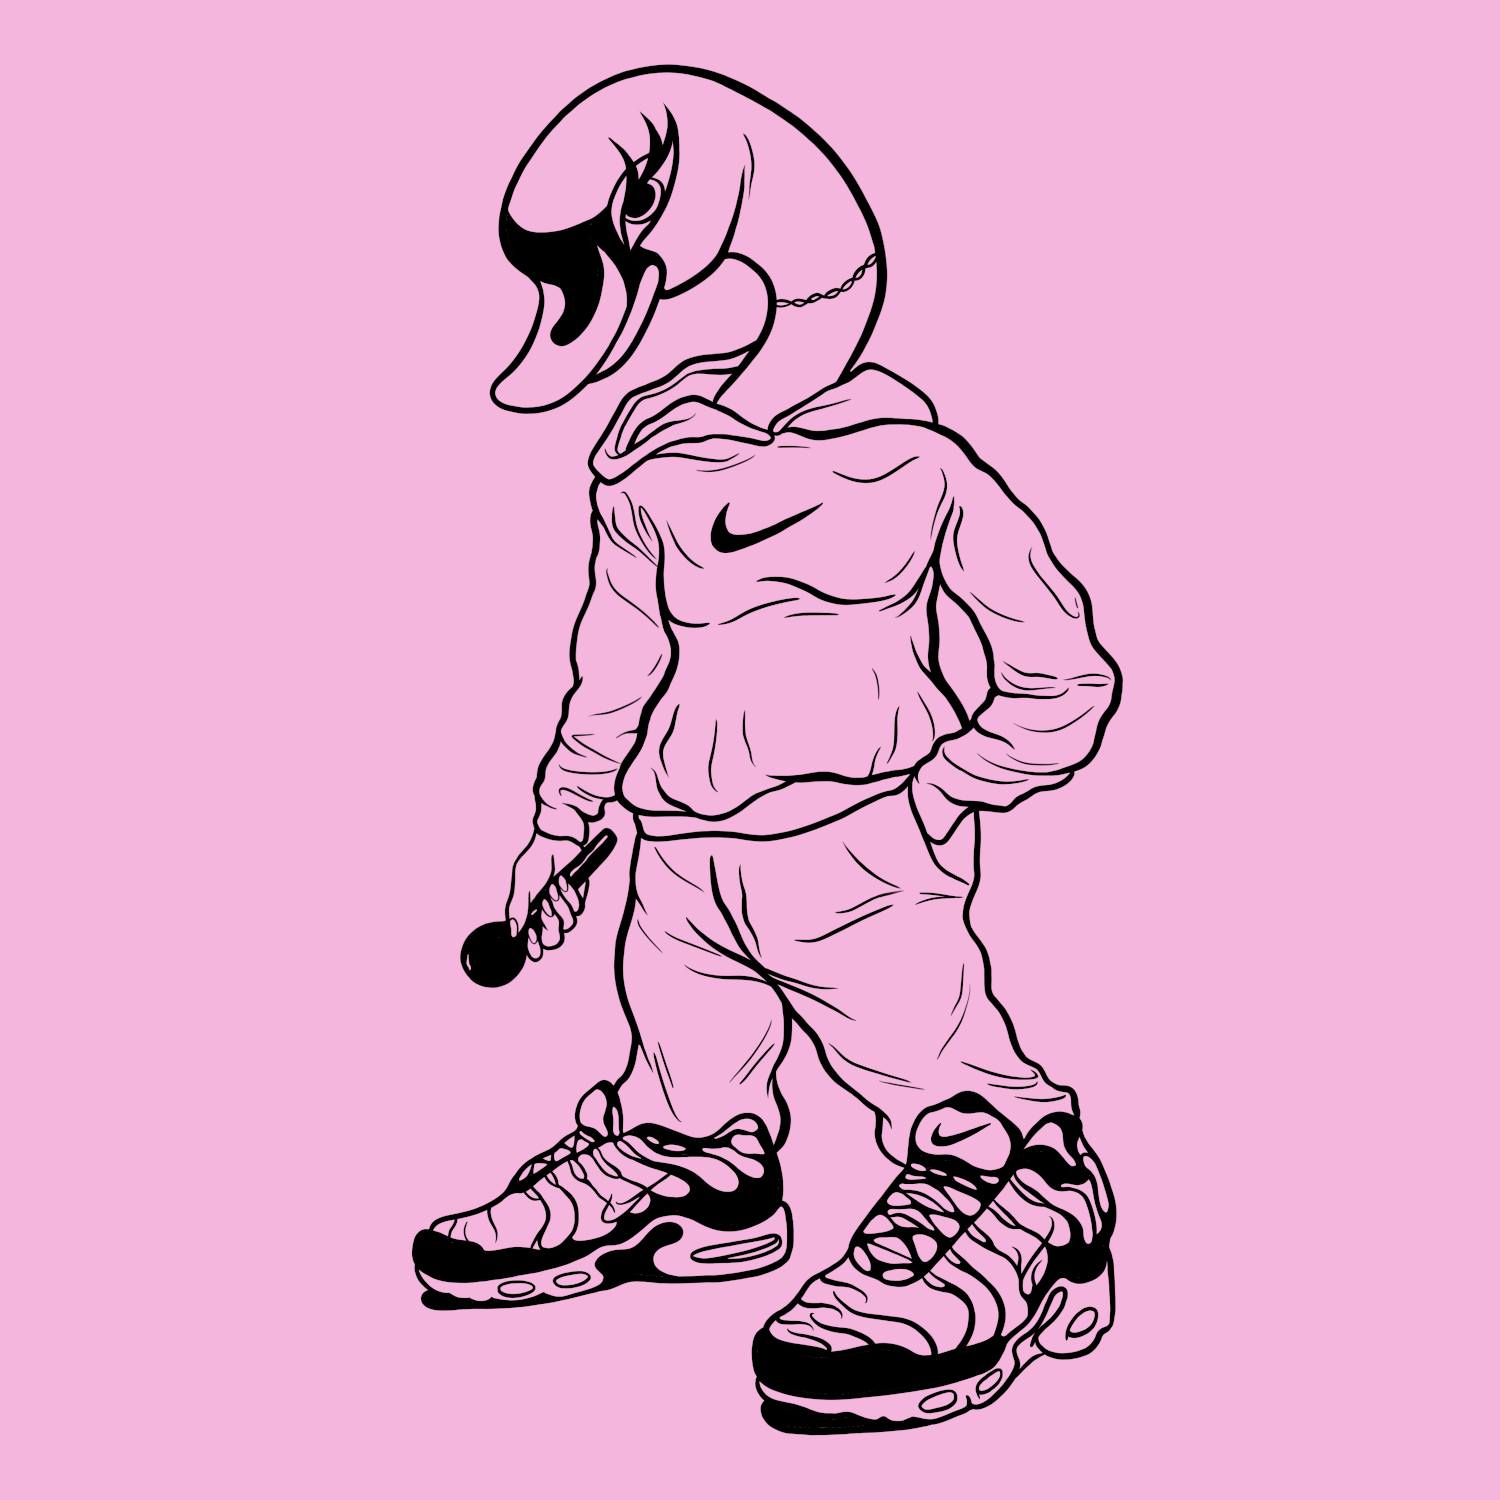 A figure with a swan's head, wearing a tracksuit and holding a microphone. Black line work drawing on a pink background.